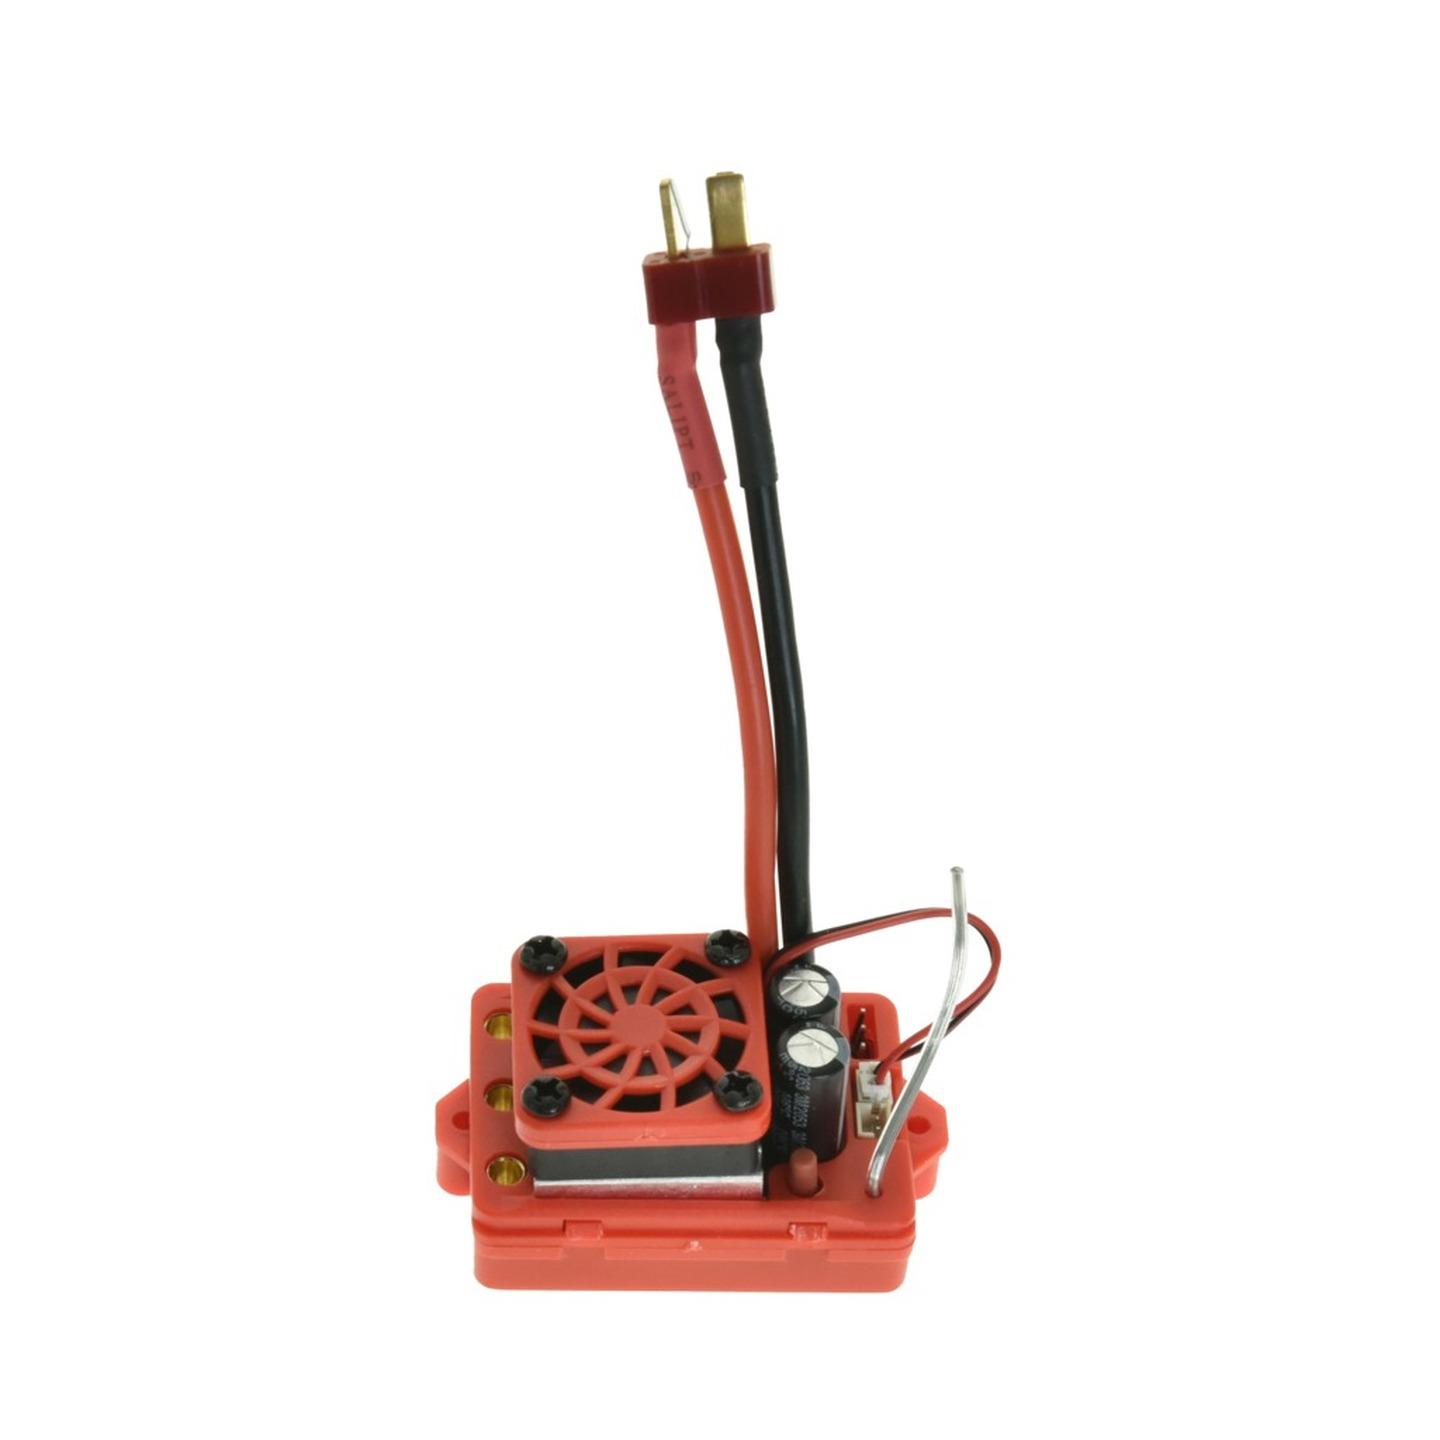 Spare R/C Electronic Speed Controller to Suit GT4802